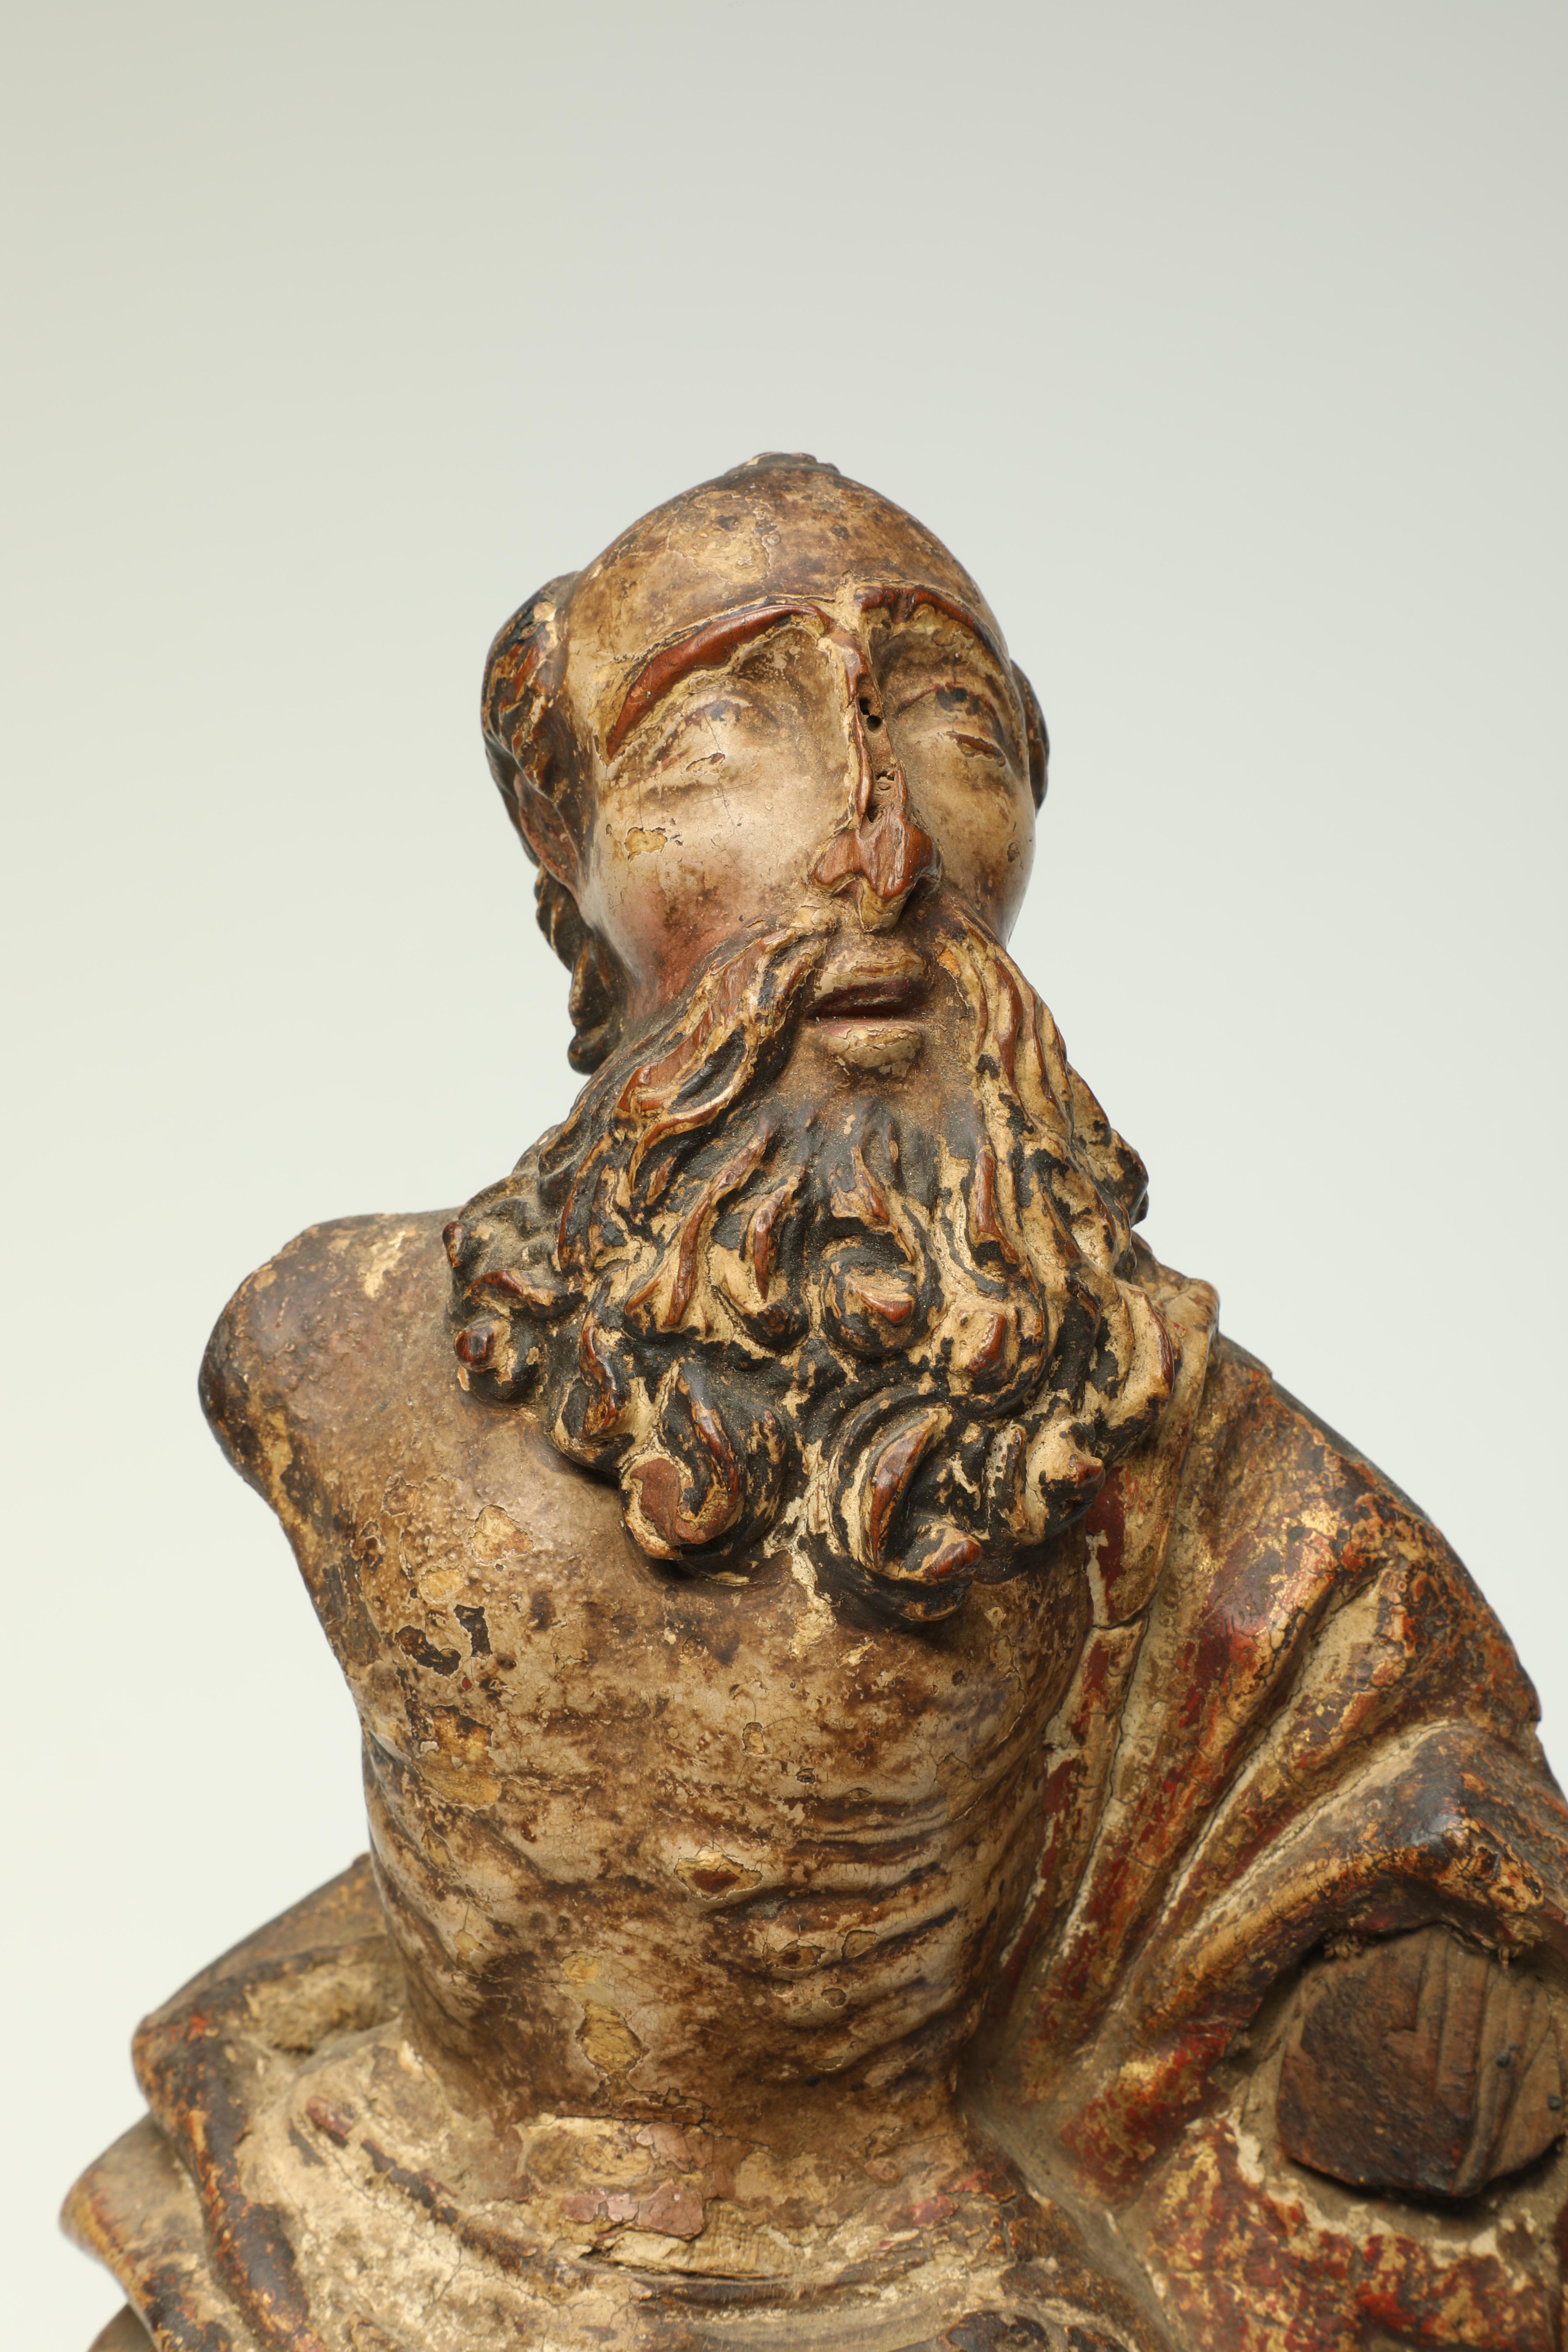 Medieval Antique 17th-18th Century Wood Italian Seated Saint Figure Fragment with Beard For Sale